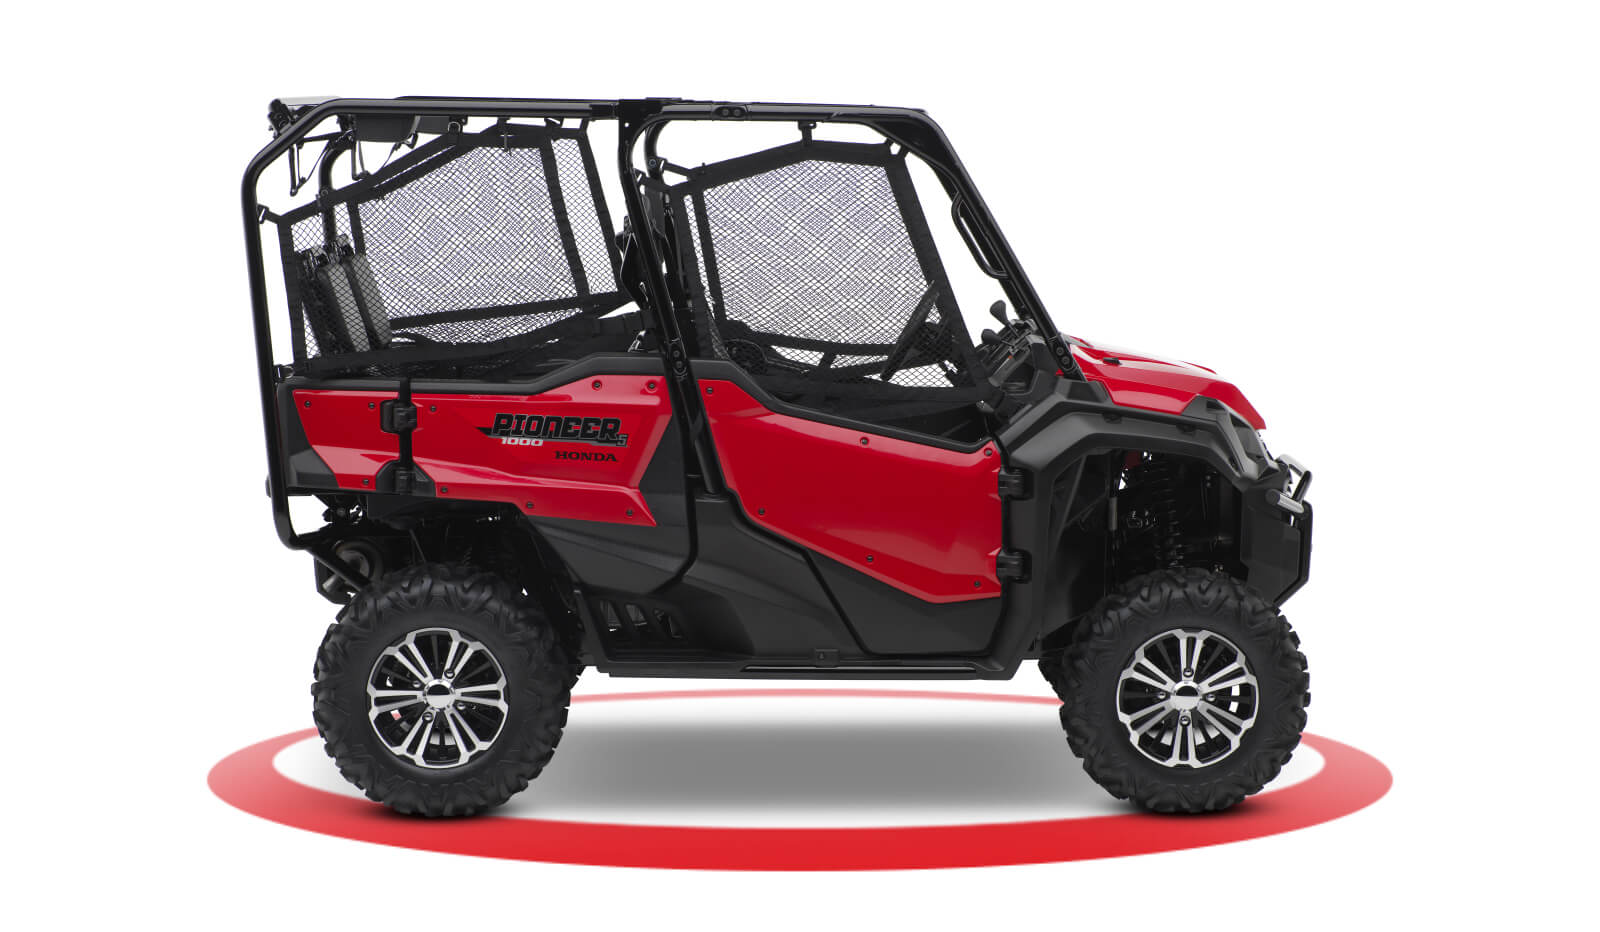 Honda Pioneer 10005 Review, Accessories, Weight & Specs 2022 NewCarBike